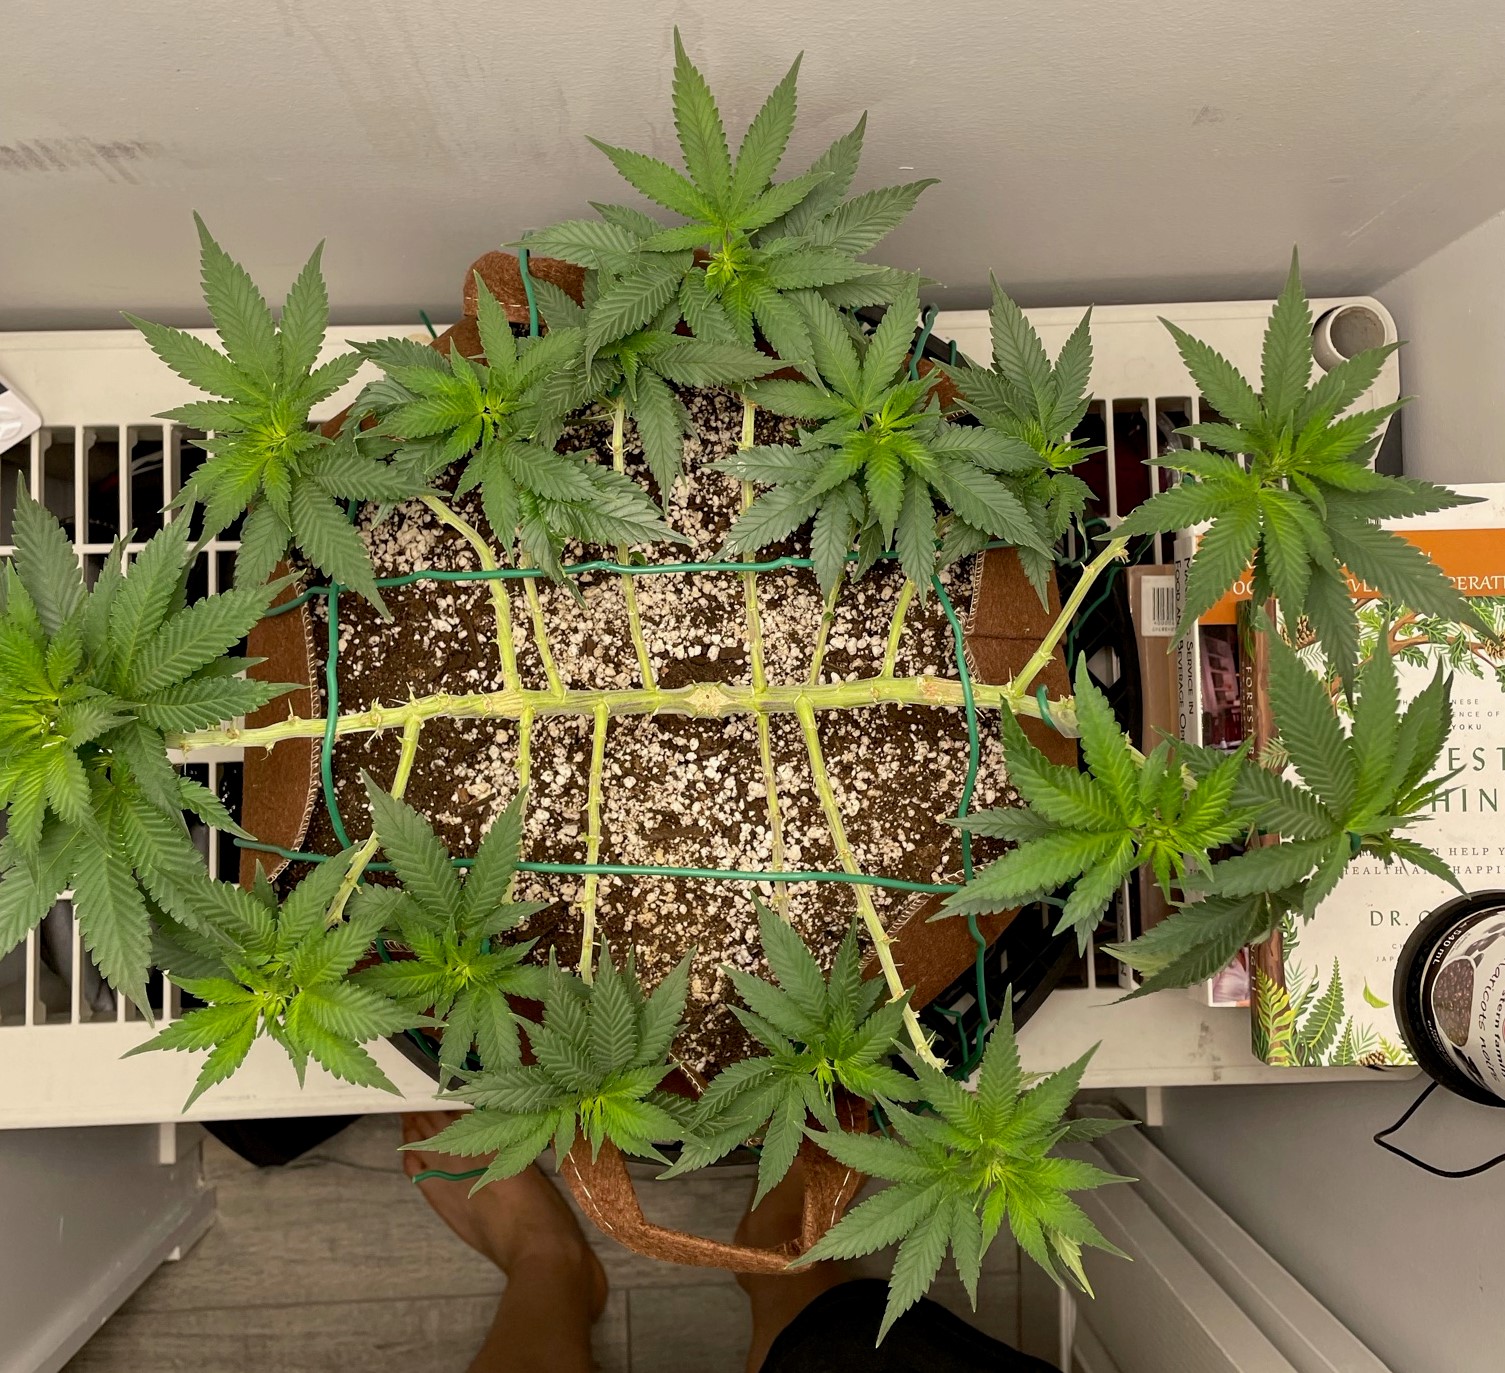 5 6 month grow   nutes or no nutes